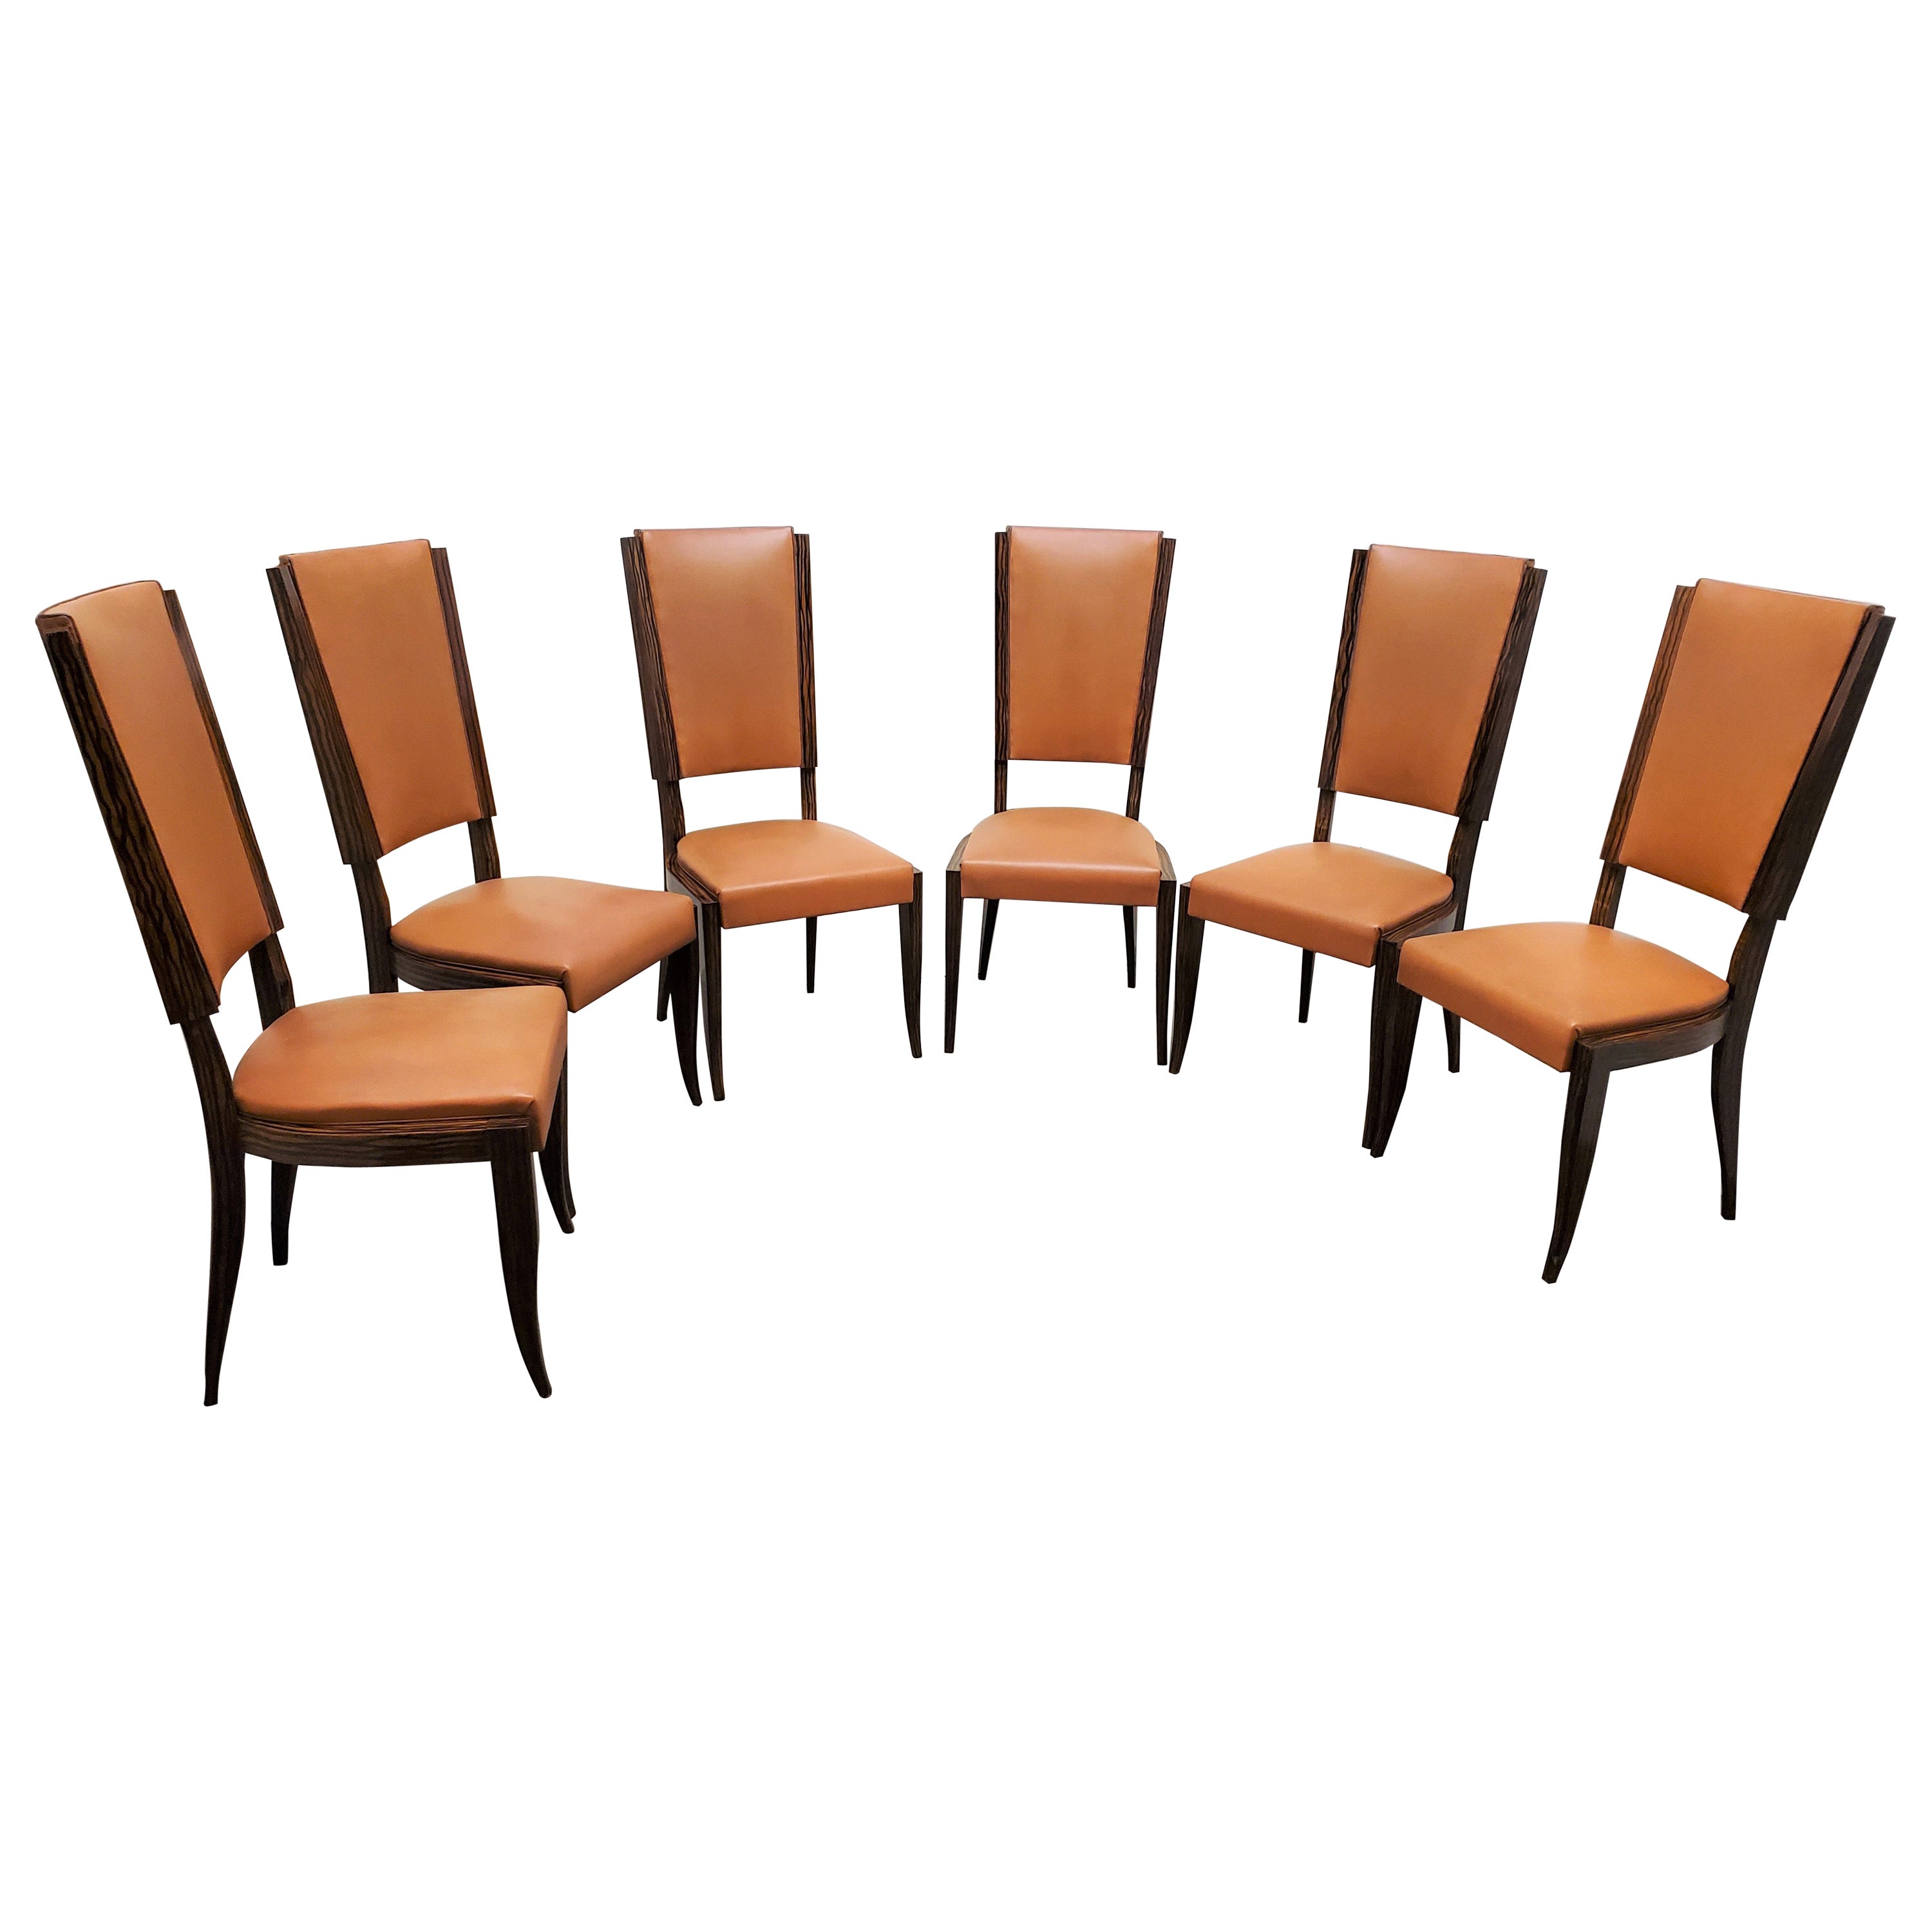 Set of Six Original French Art Deco Faux Macassar Ebony Wood Dining Chairs For Sale